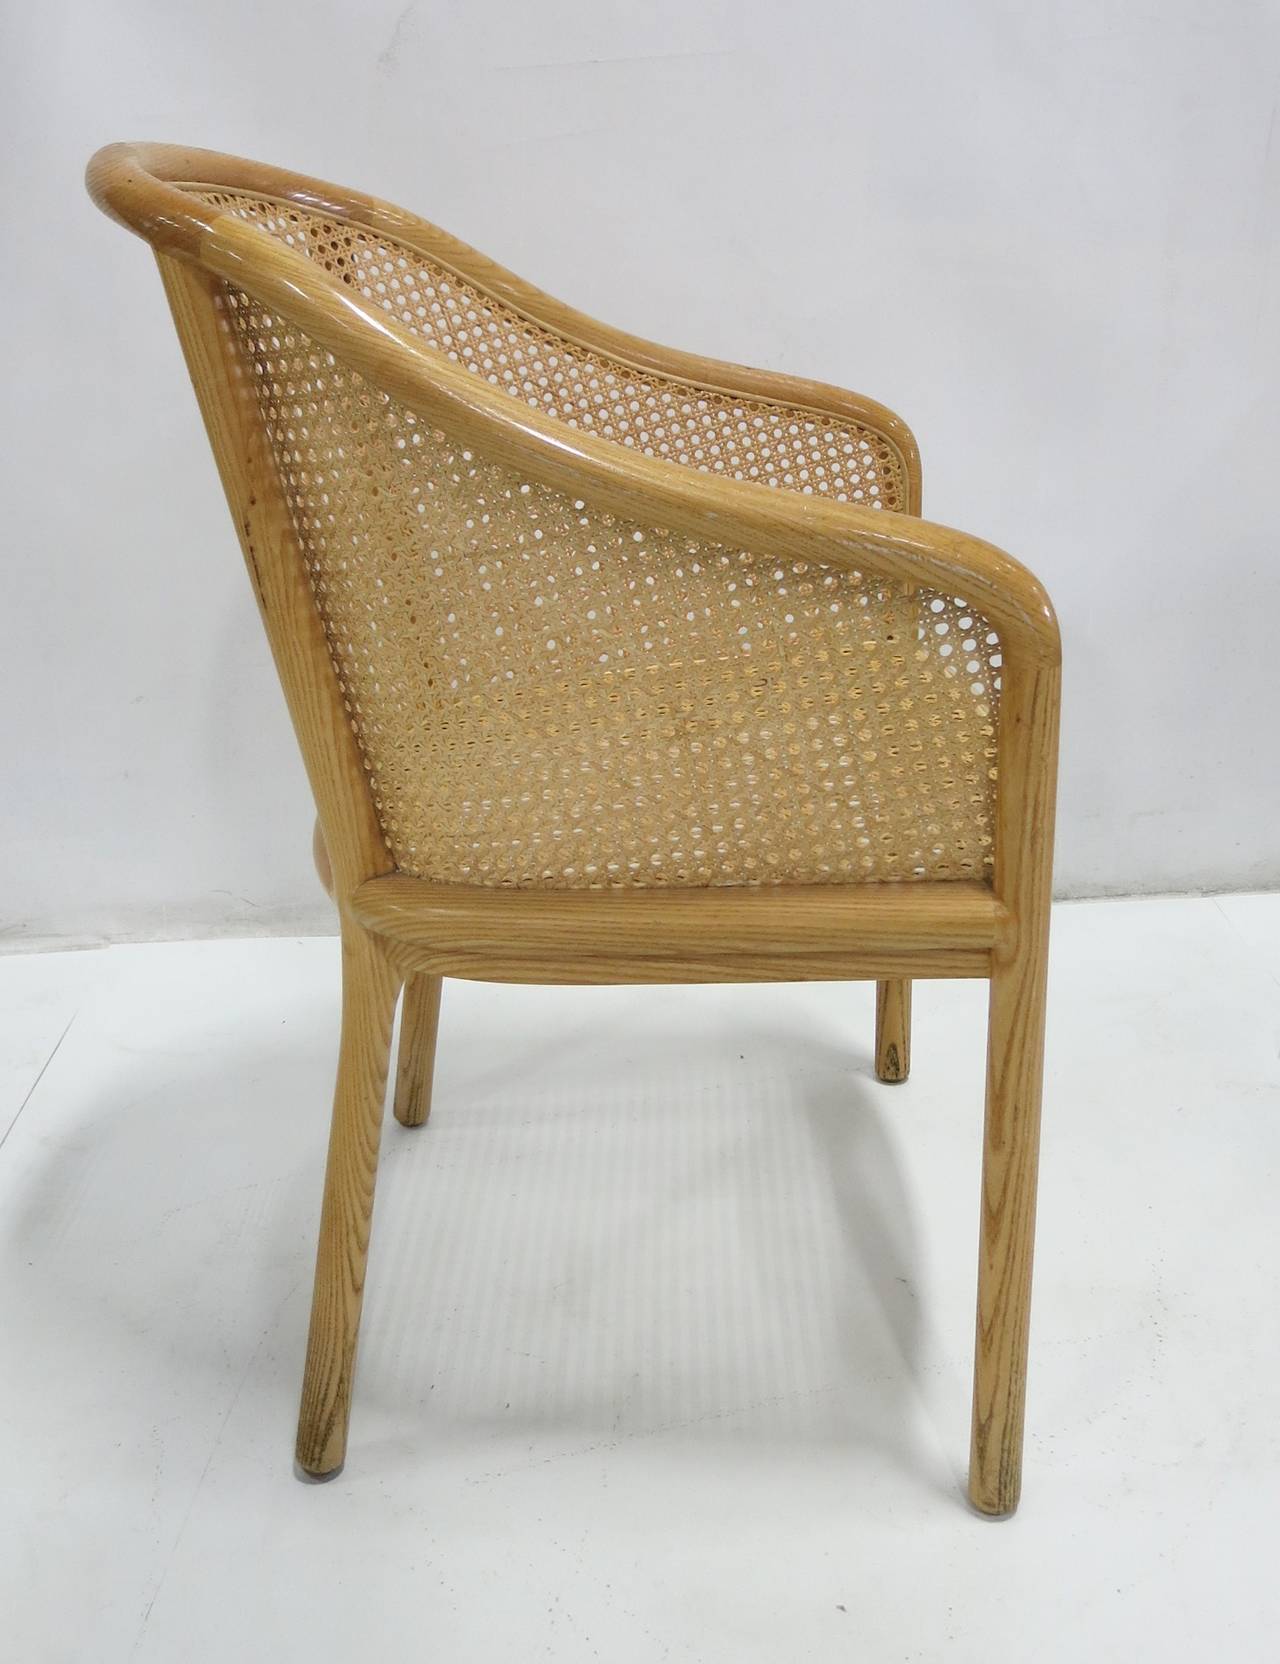 One bleached oak armchair with caned back and seat by Ward Bennett for Brickel.